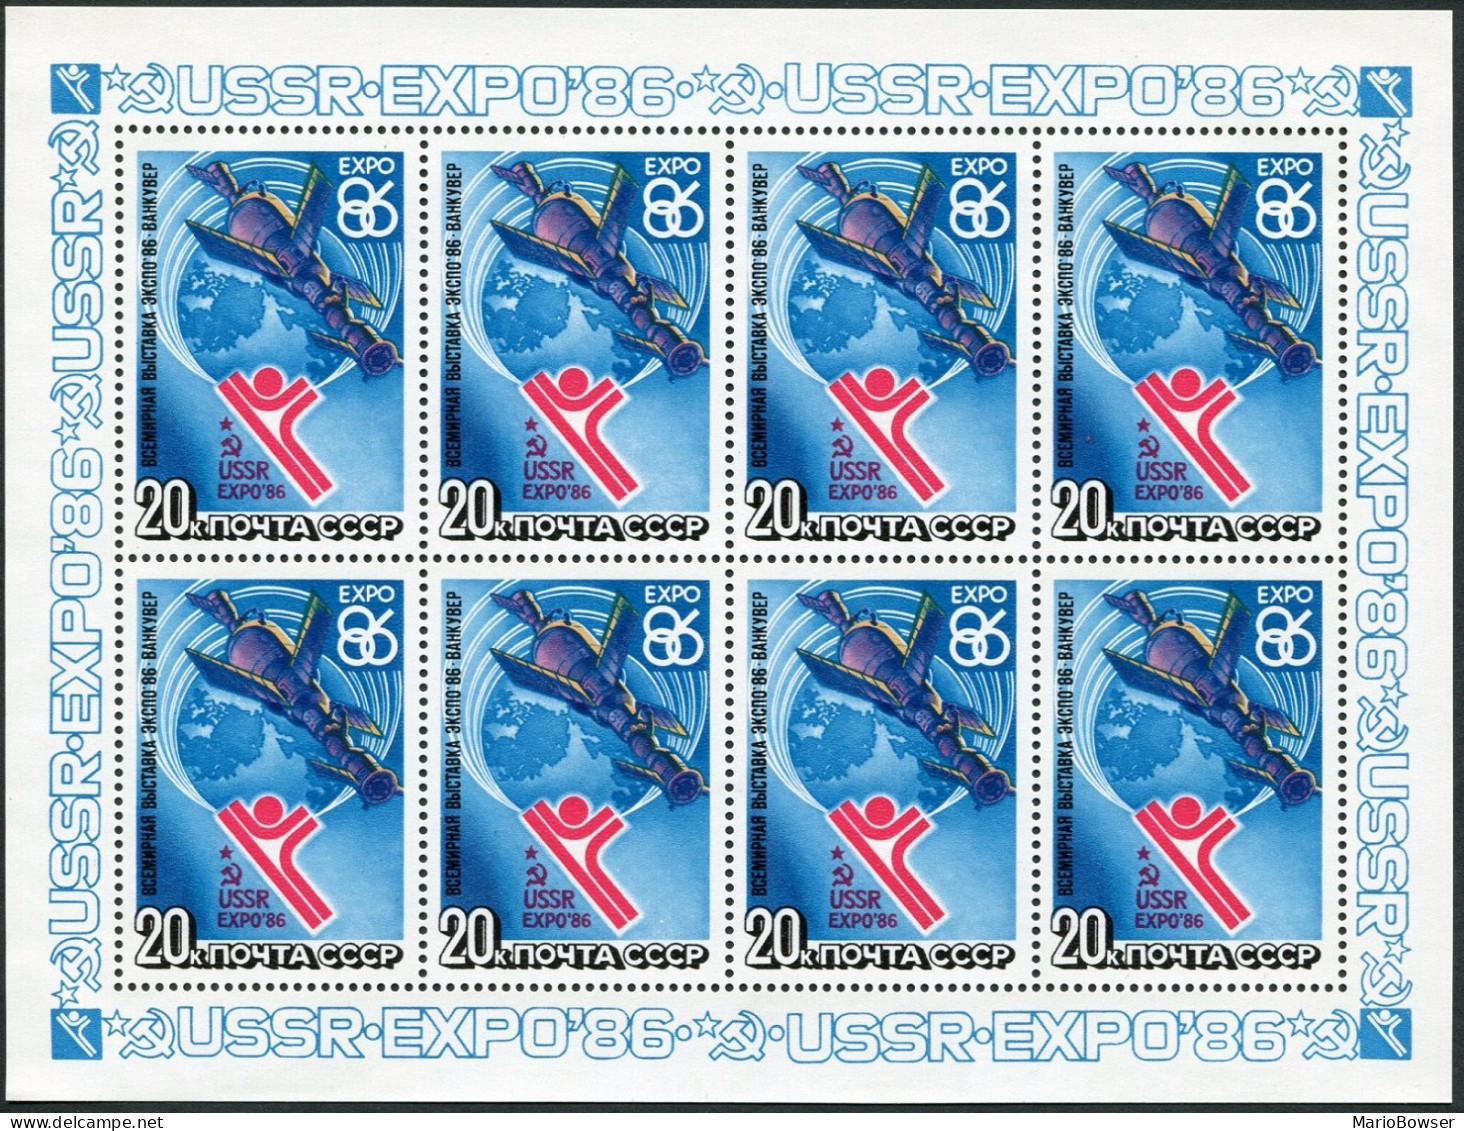 Russia 5440a Sheet, MNH. Michel 5589 Klb. EXPO-1986, Vancouver. Space Station. - Nuevos